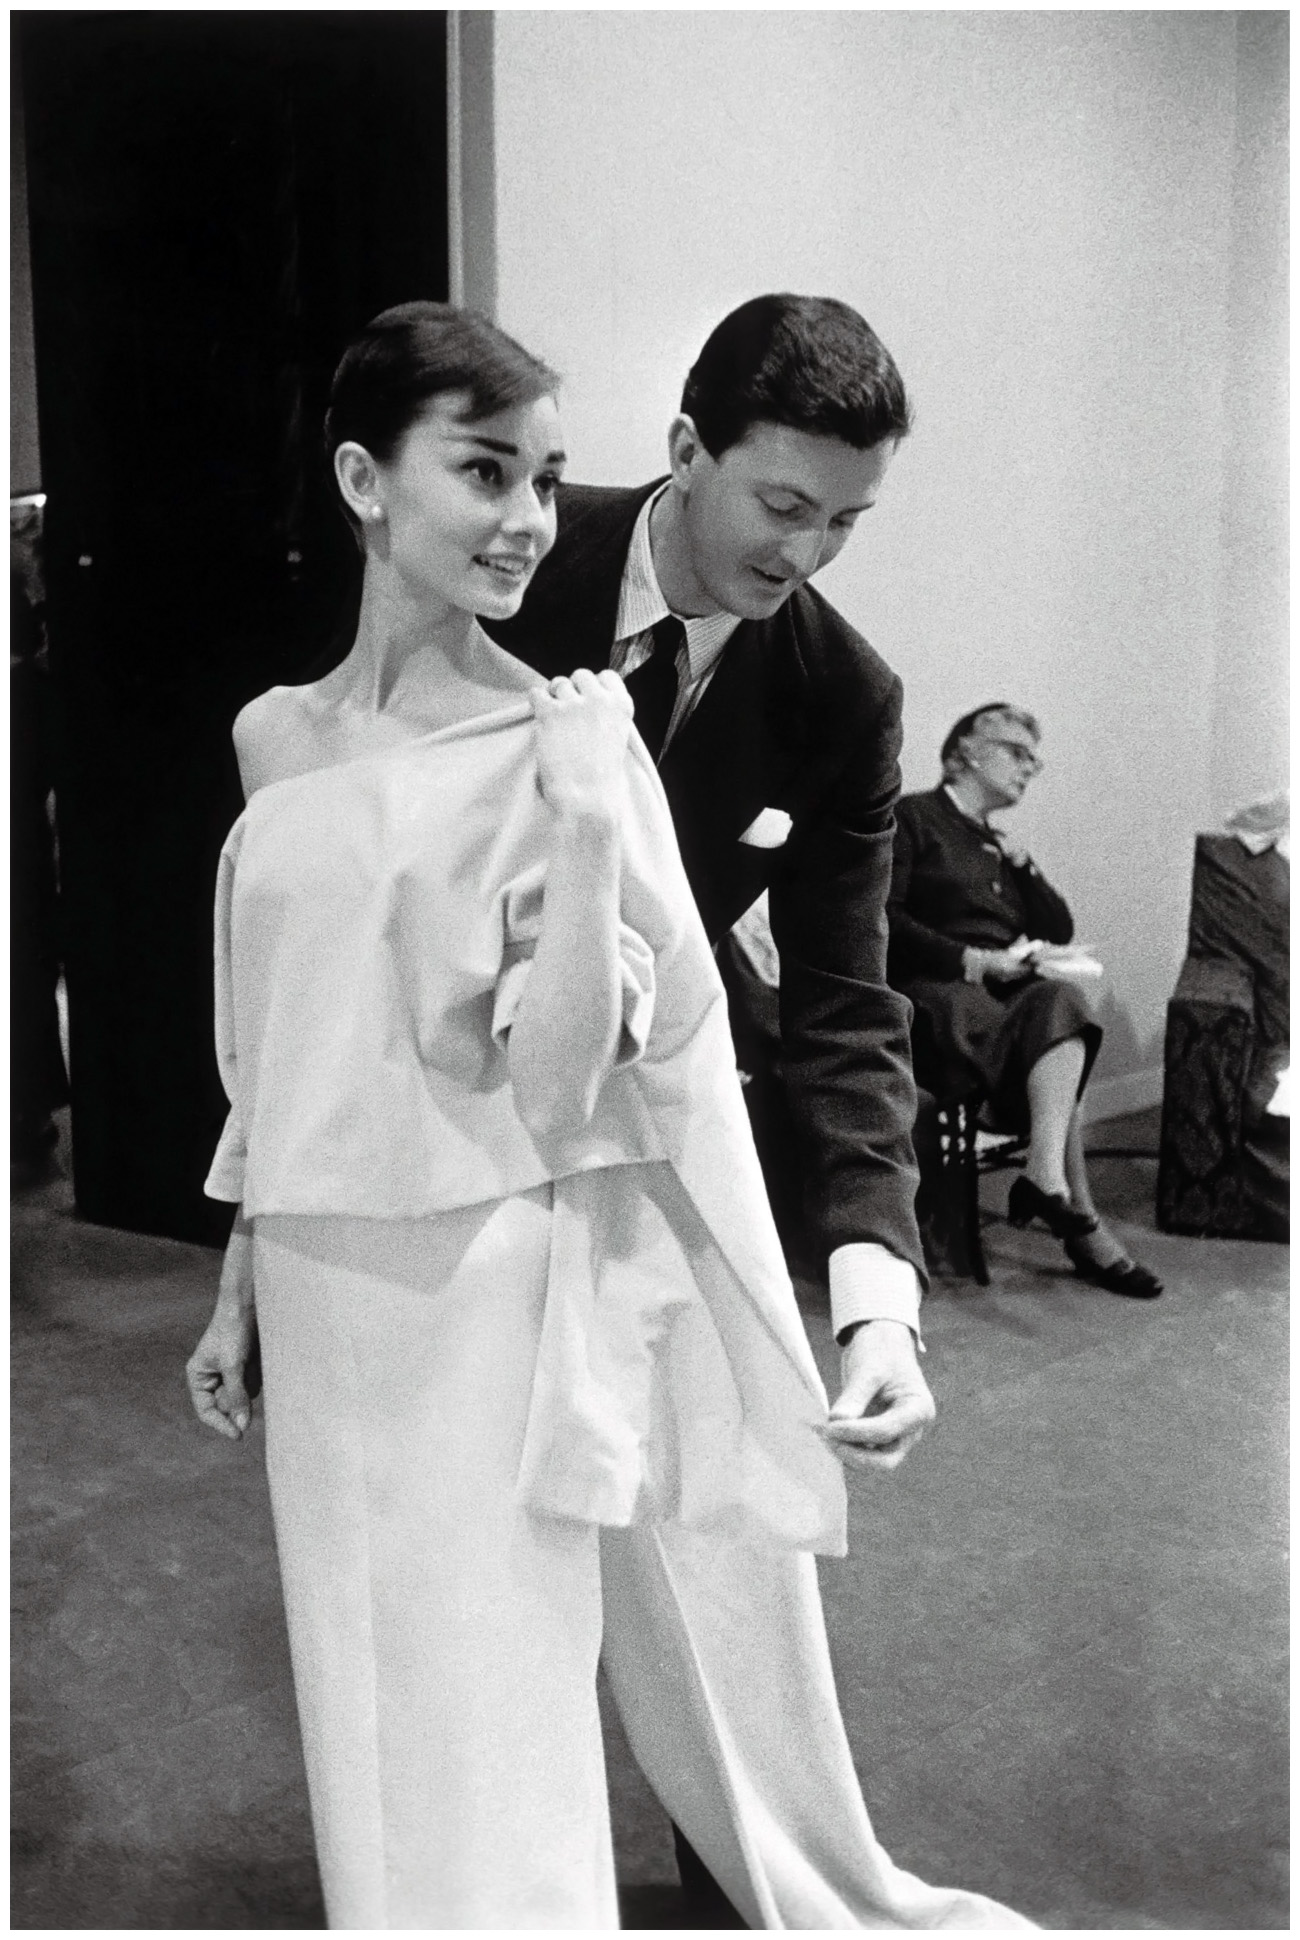 actress-audrey-hepburn-with-h-givenchy-vogue-conde-nast-publications.jpg